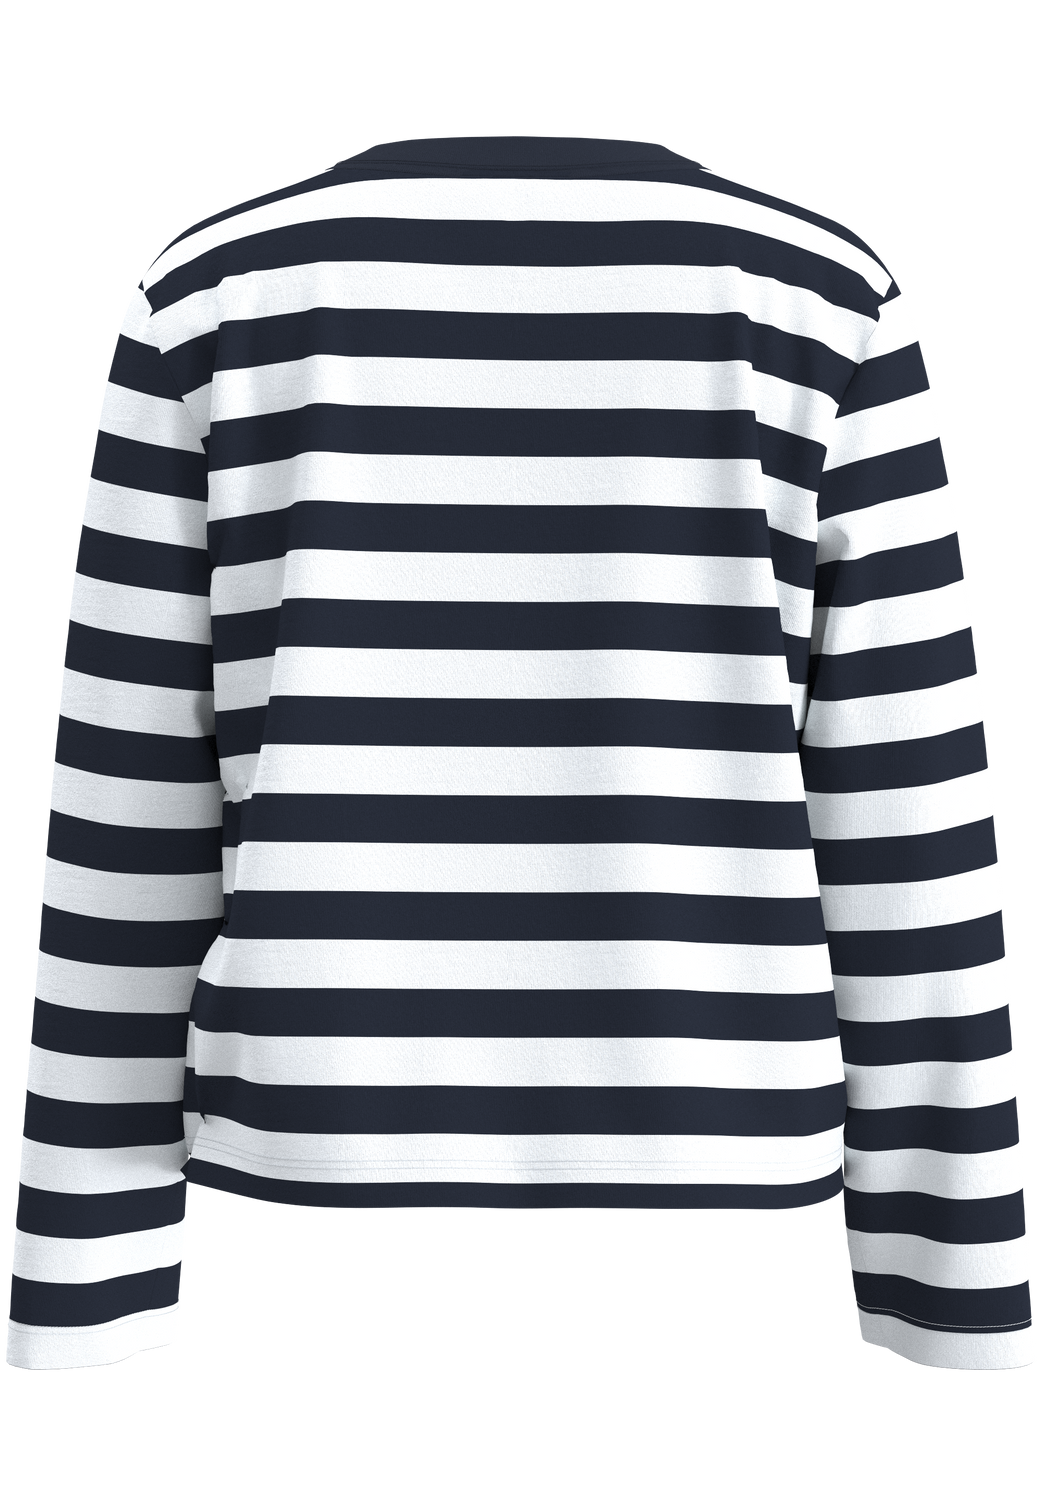 SELECTED FEMME - ESSENTIAL LS STRIPED BOXY T-Shirt - Dark Sapphire